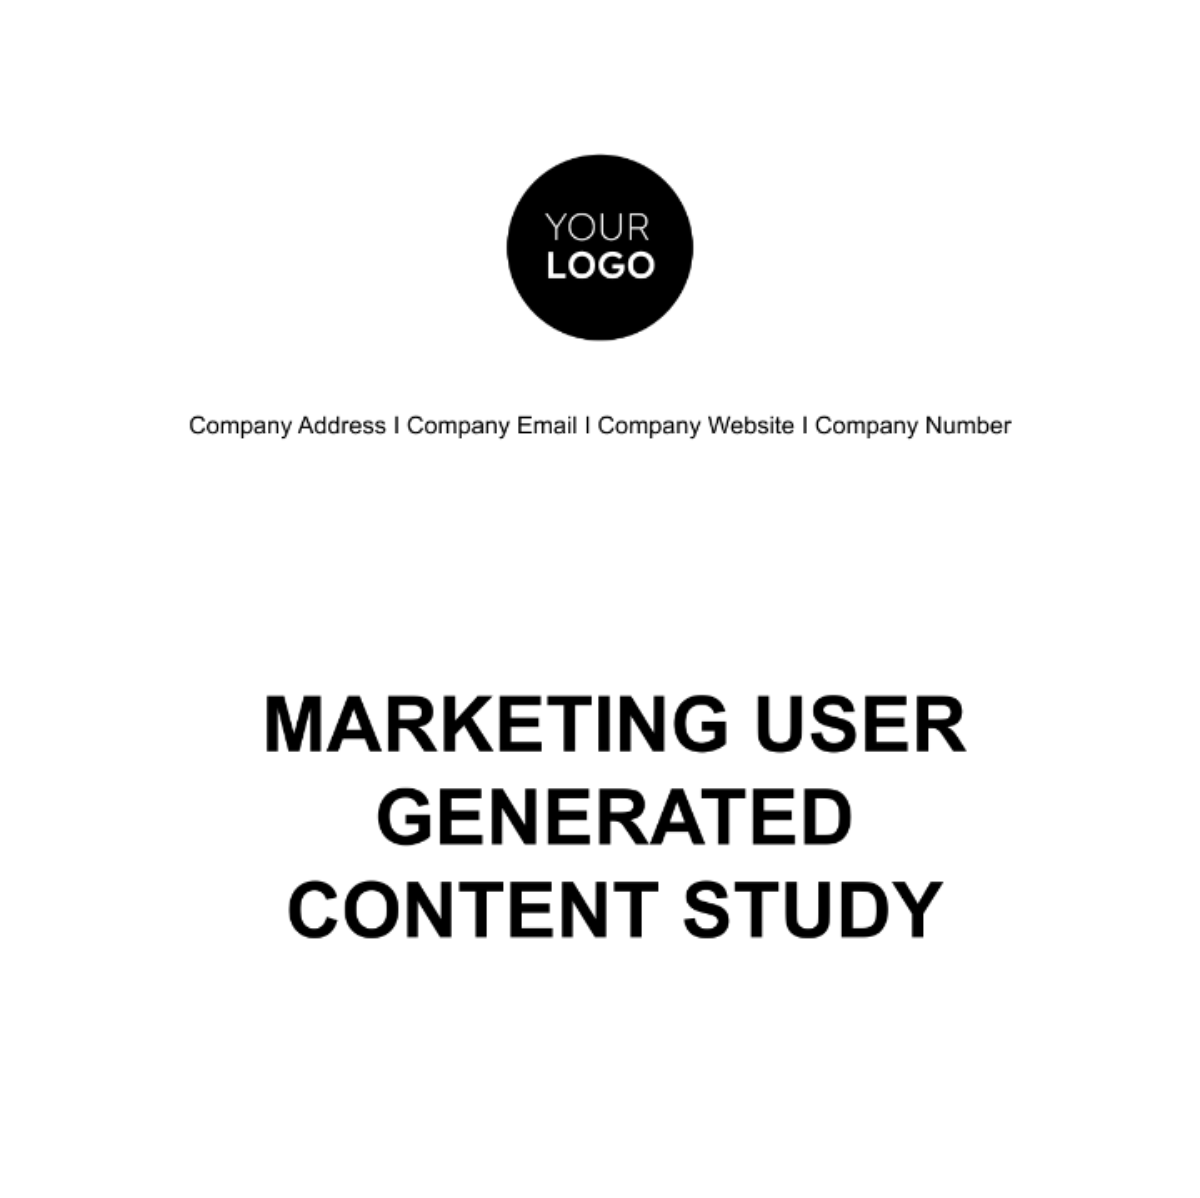 Marketing User Generated Content Study Template